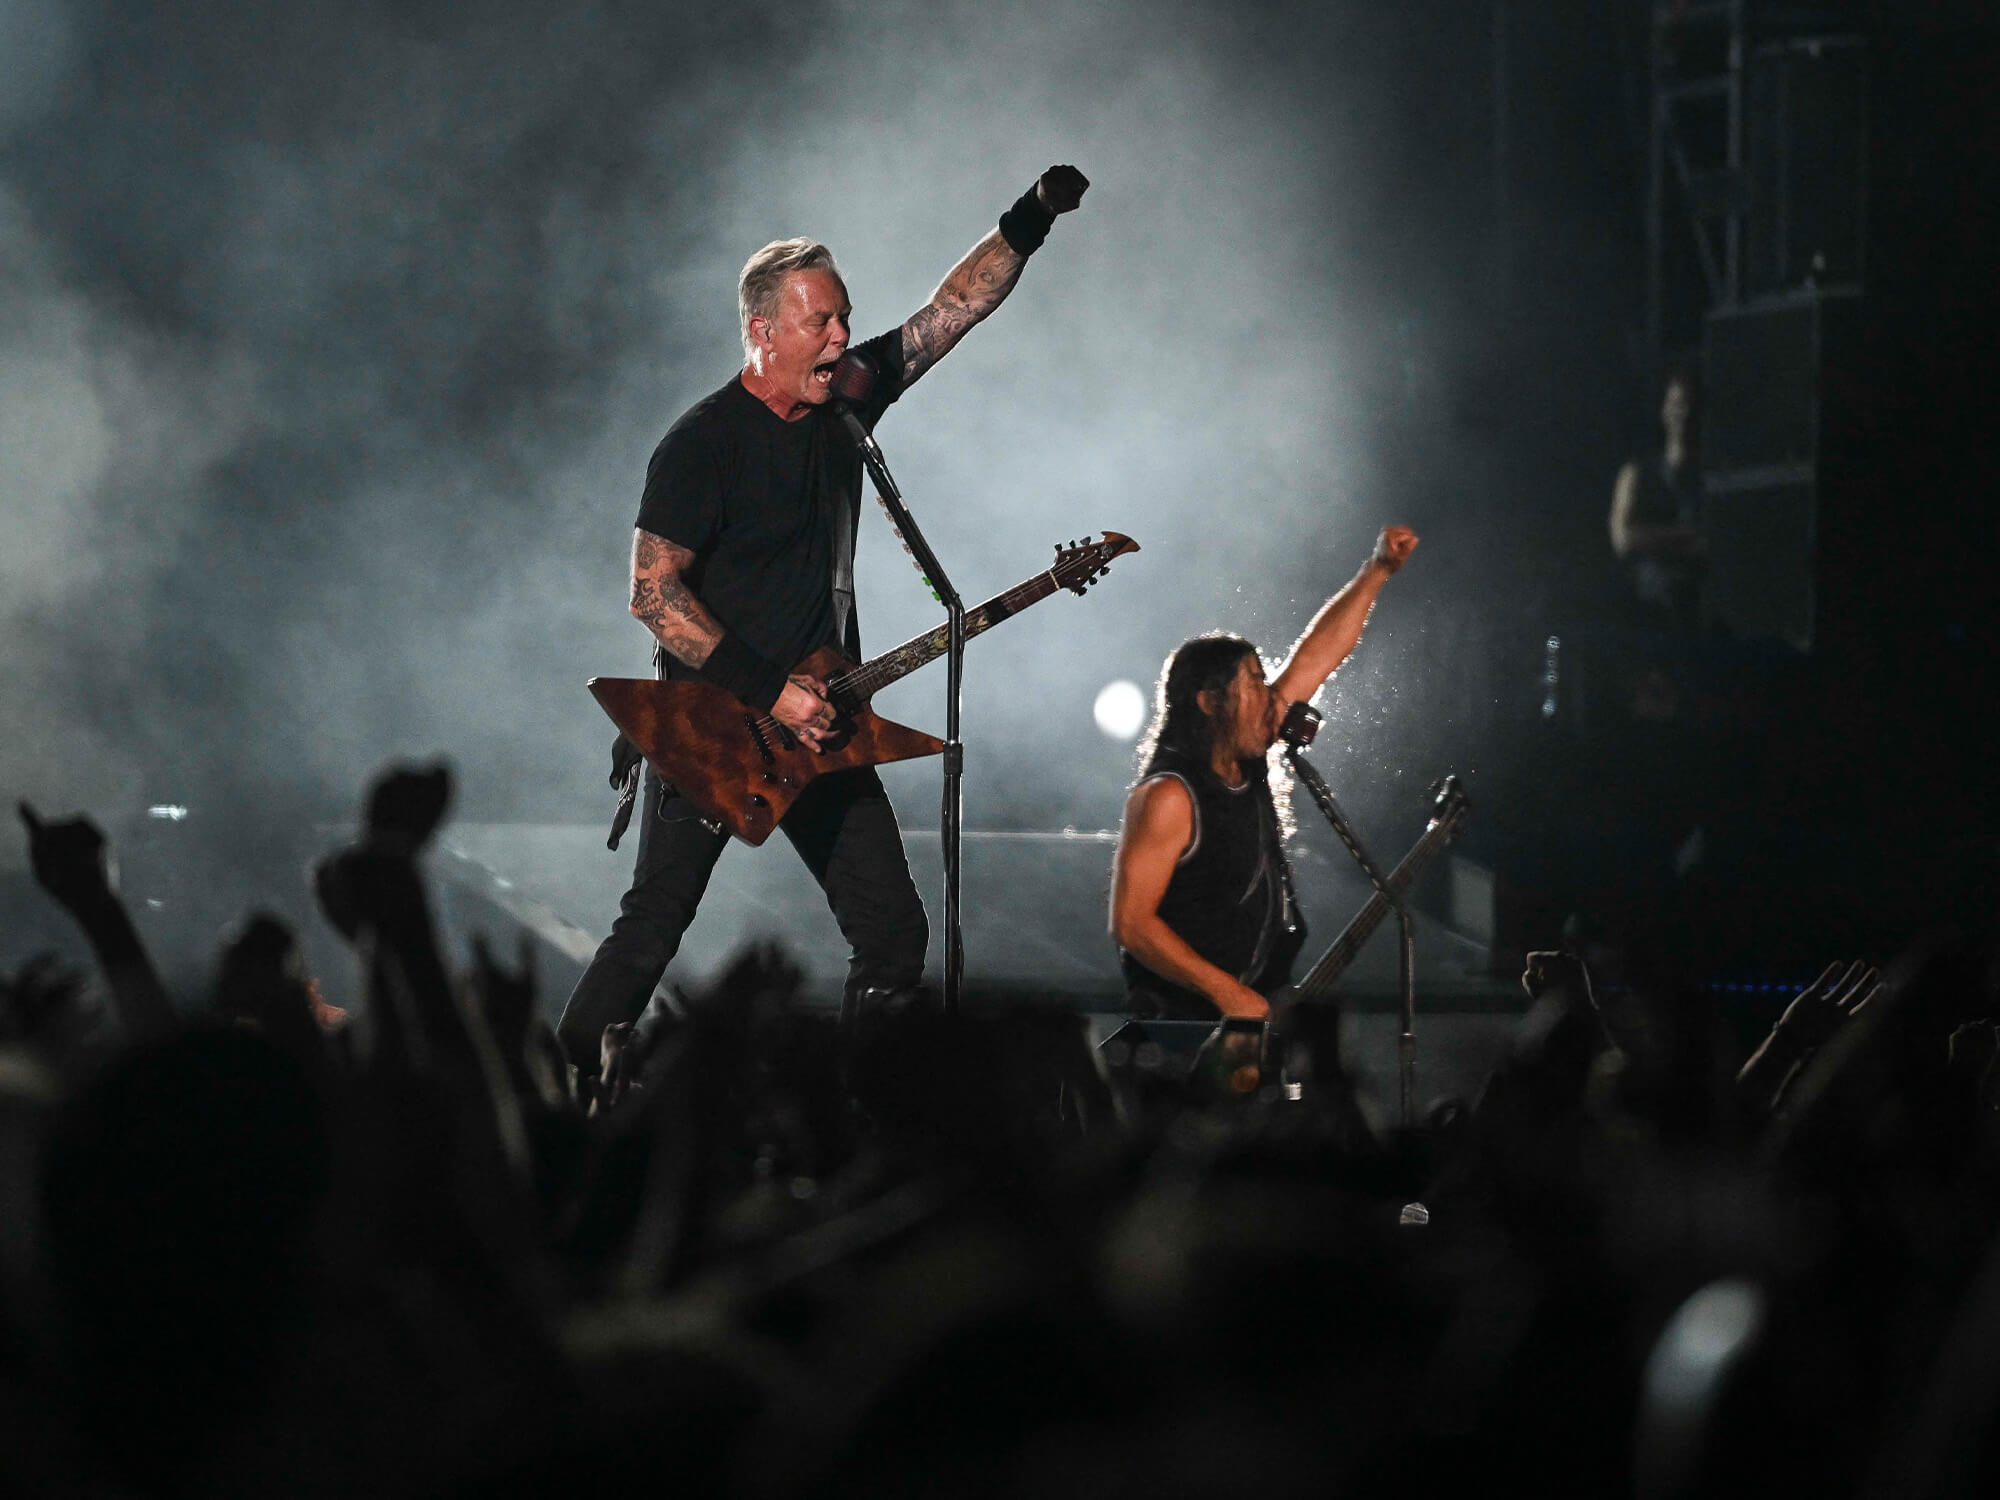 James Hetfield and Robert Trujillo on stage. Both hold on hand to the air and a dark, shadowy crowd is seen below them.